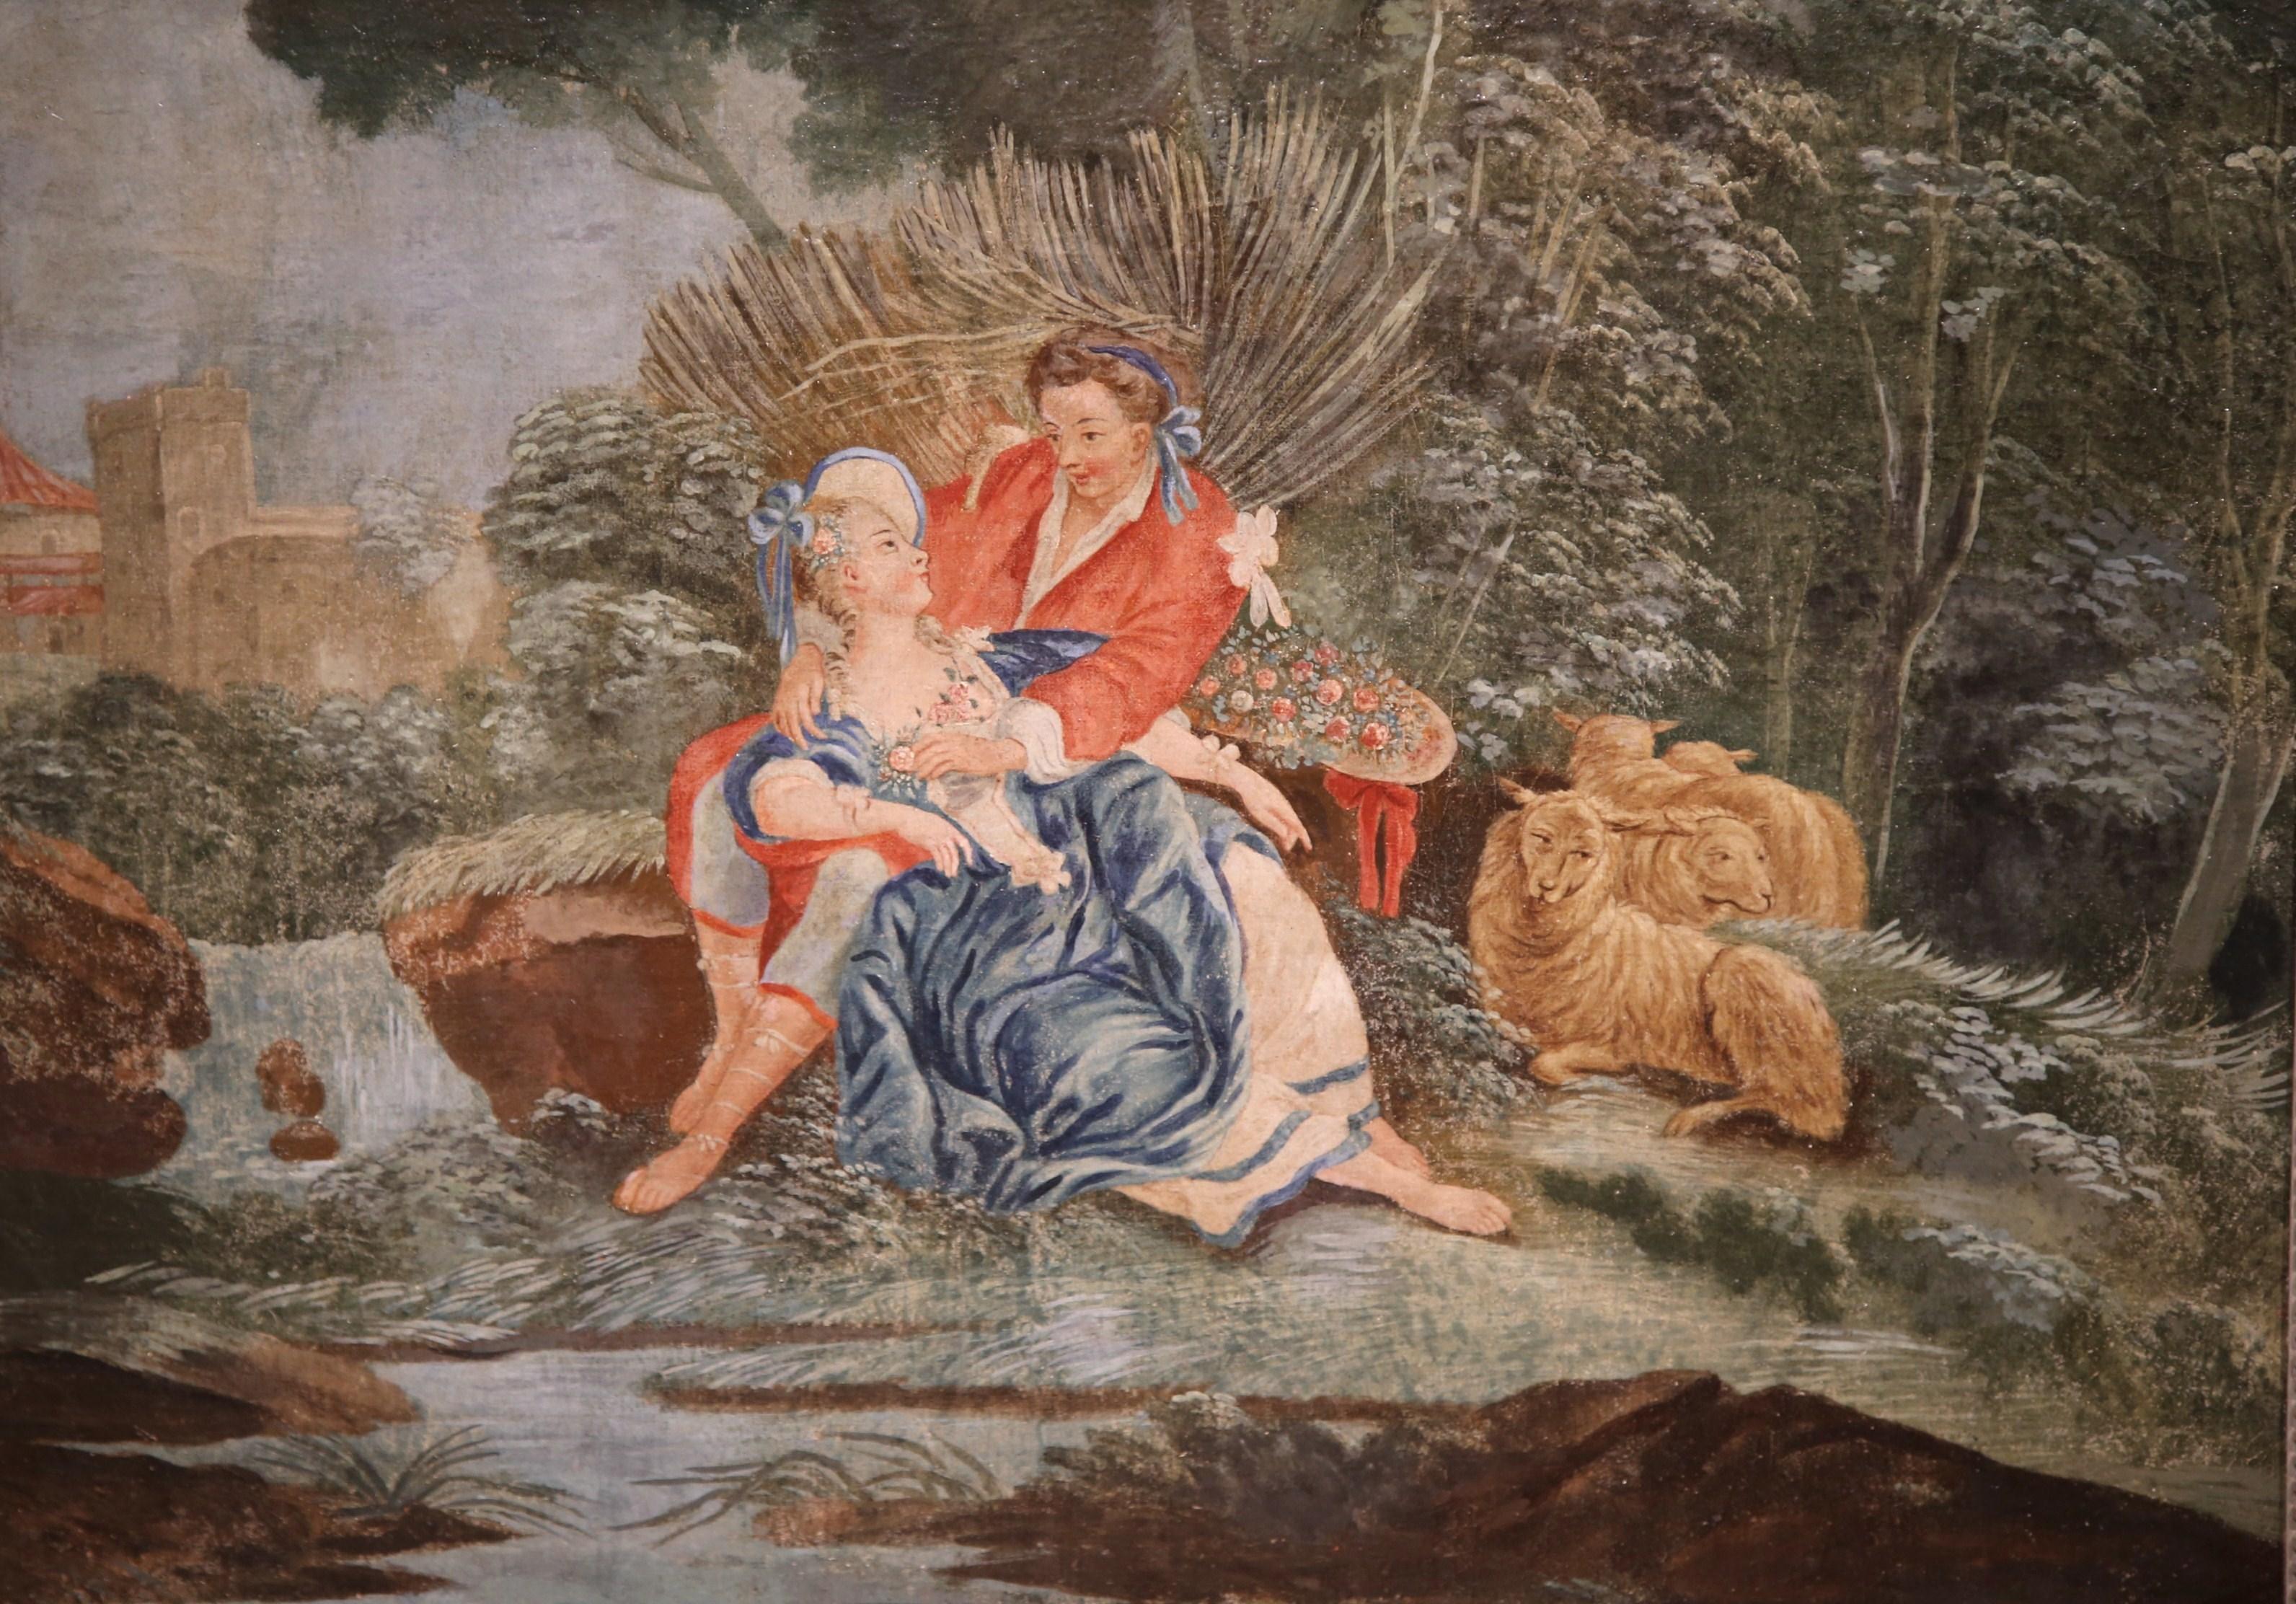 This elegant antique painting on canvas was created in France, circa 1760. The colorful composition features a romantic scene with a gentleman courting a woman in a park, and sheep and foliage in the background; the figures are dressed in